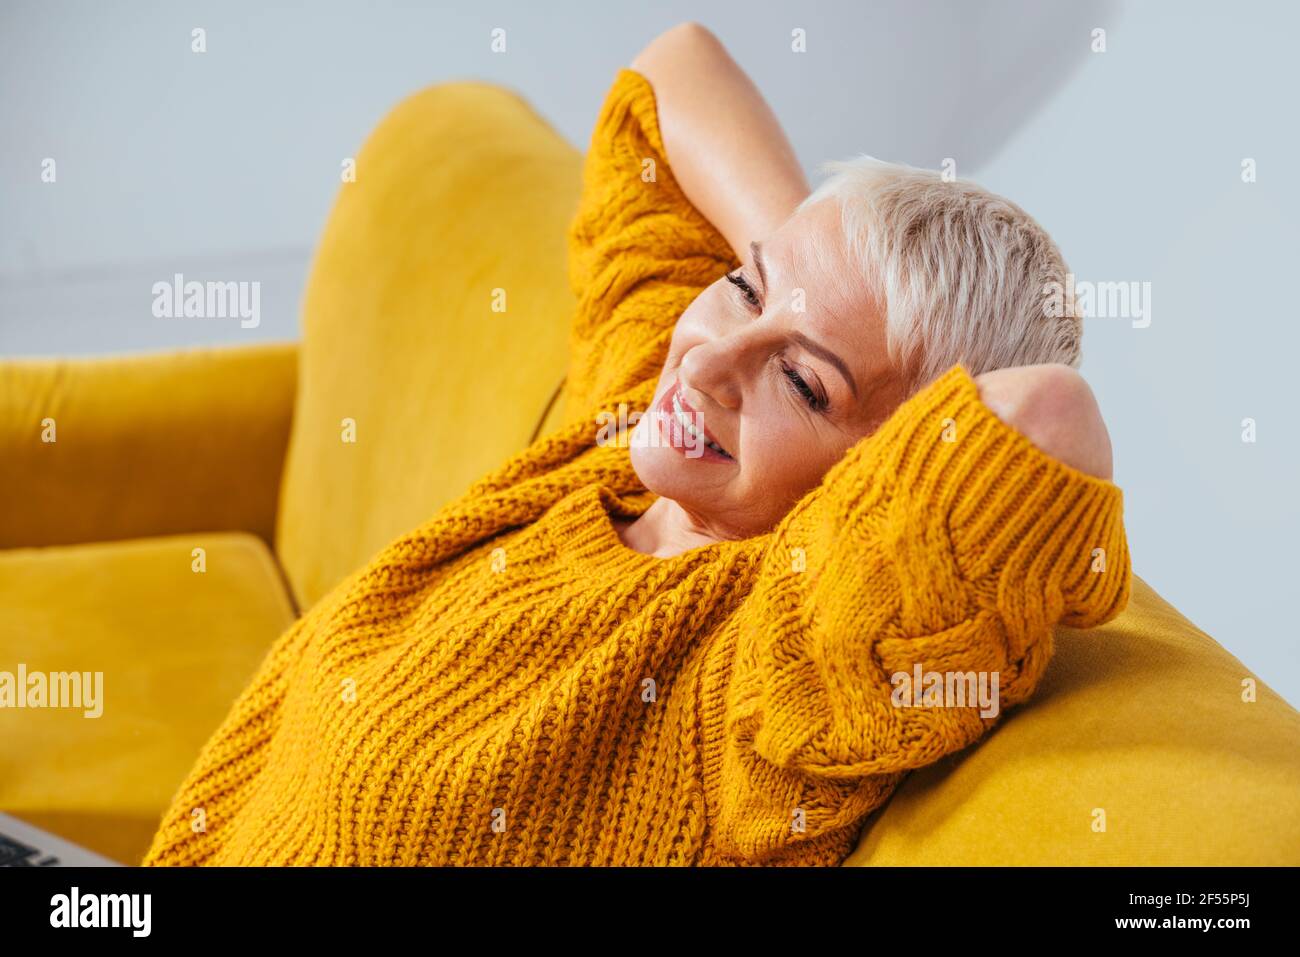 Smiling woman with hands behind back looking away while resting on sofa Stock Photo